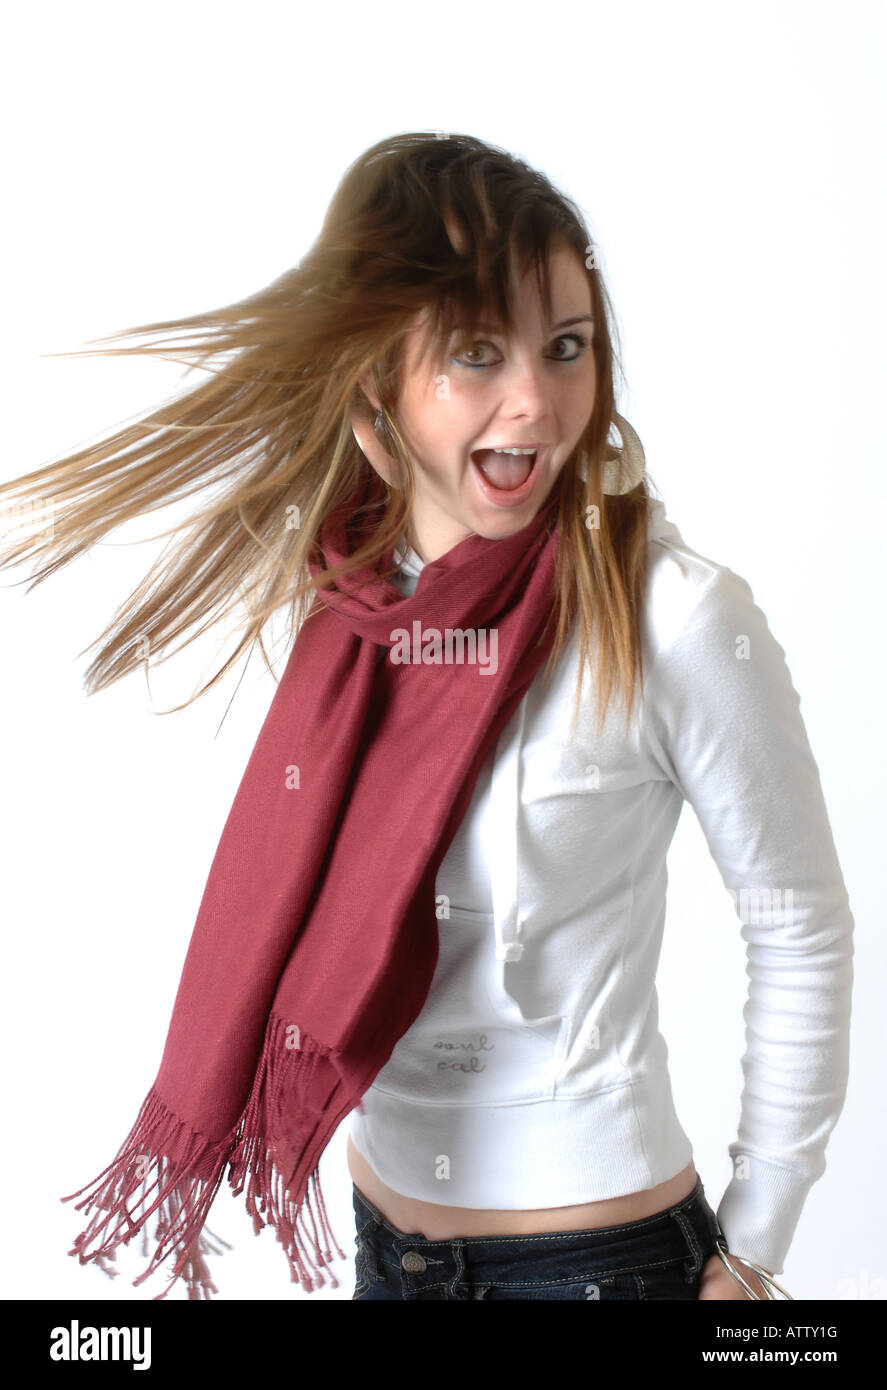 A generic photograph of a teenage girl shaking her hair Stock Photo